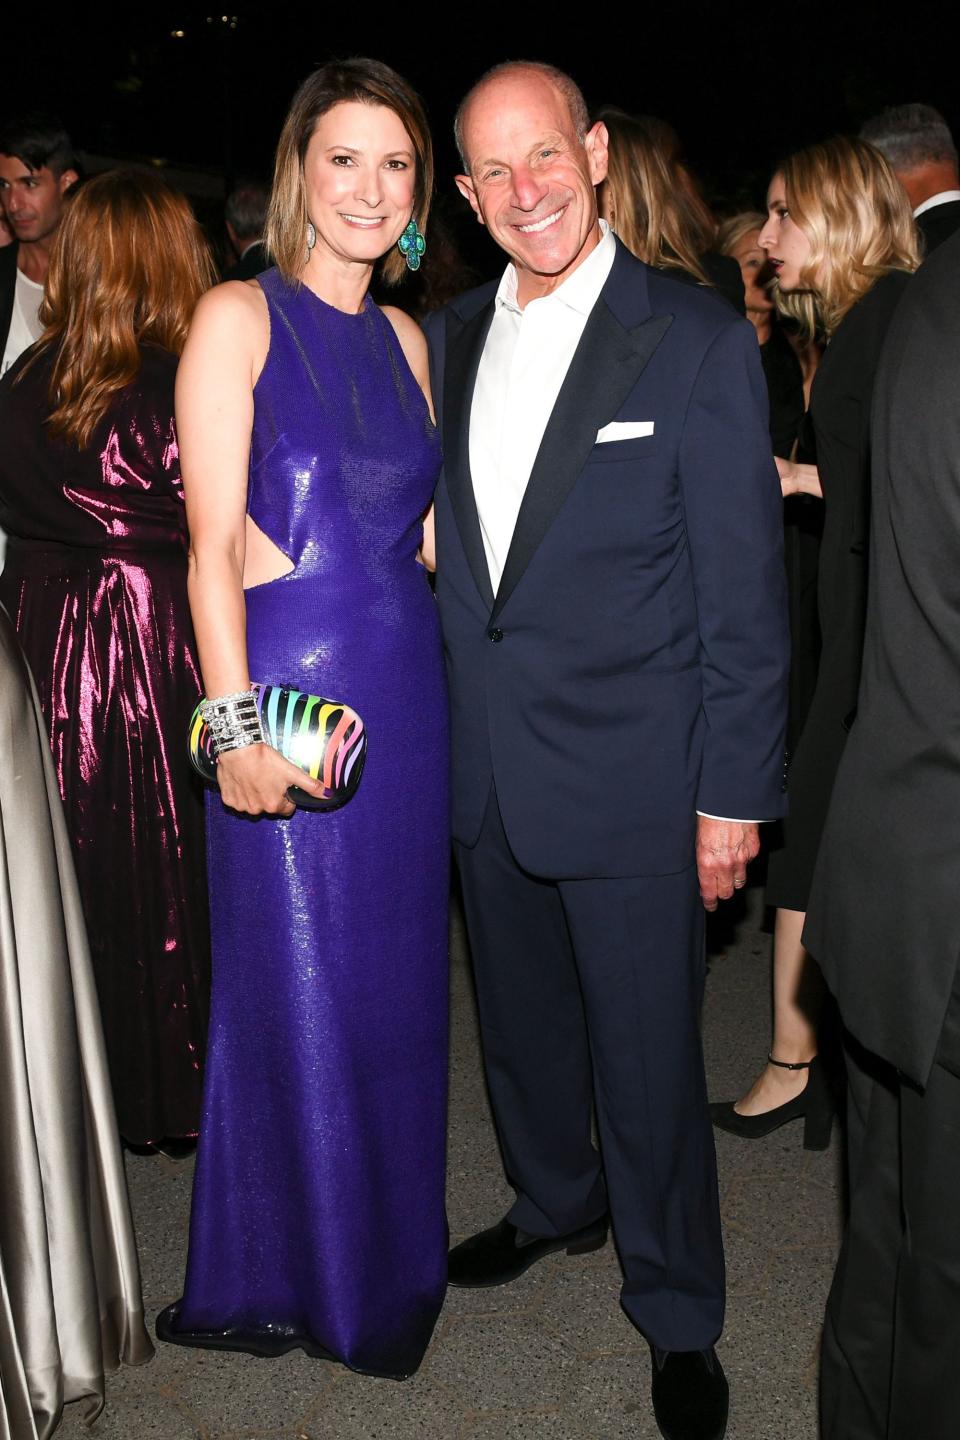 The American fashion icon celebrated his 50th anniversary with a grand fête in Central Park.